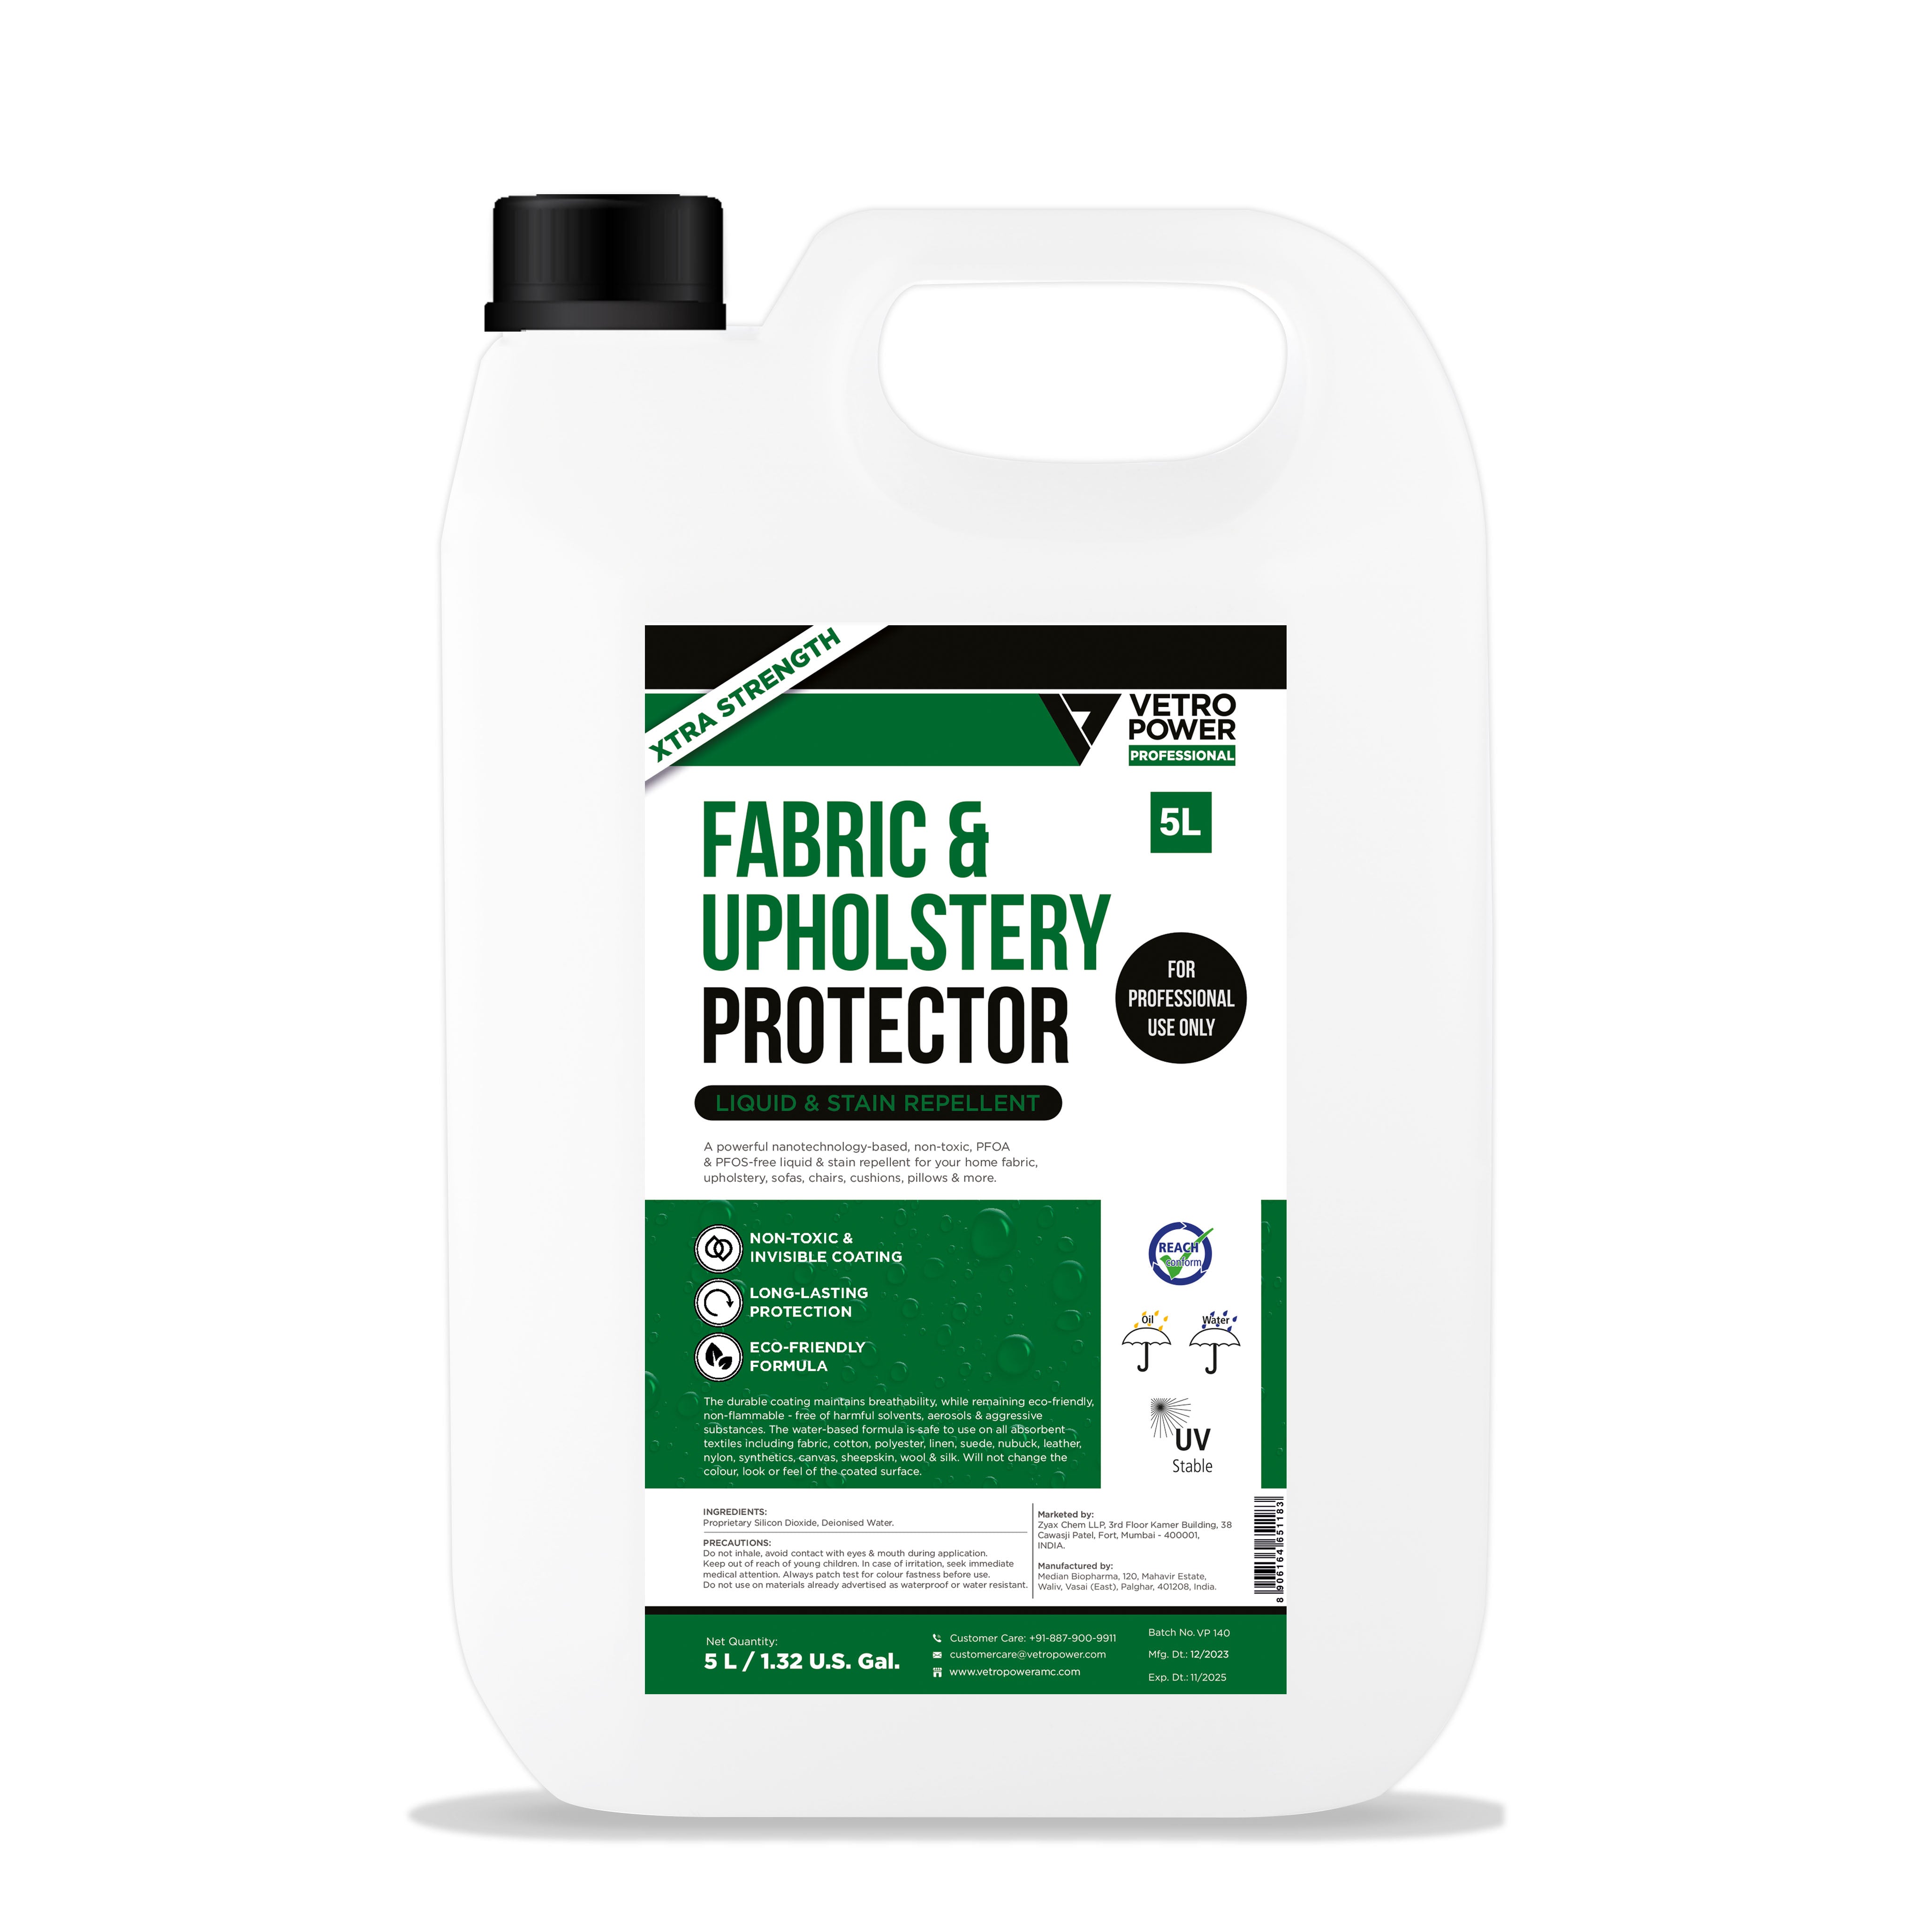 Vetro Power Professional Fabric & Upholstery Protector